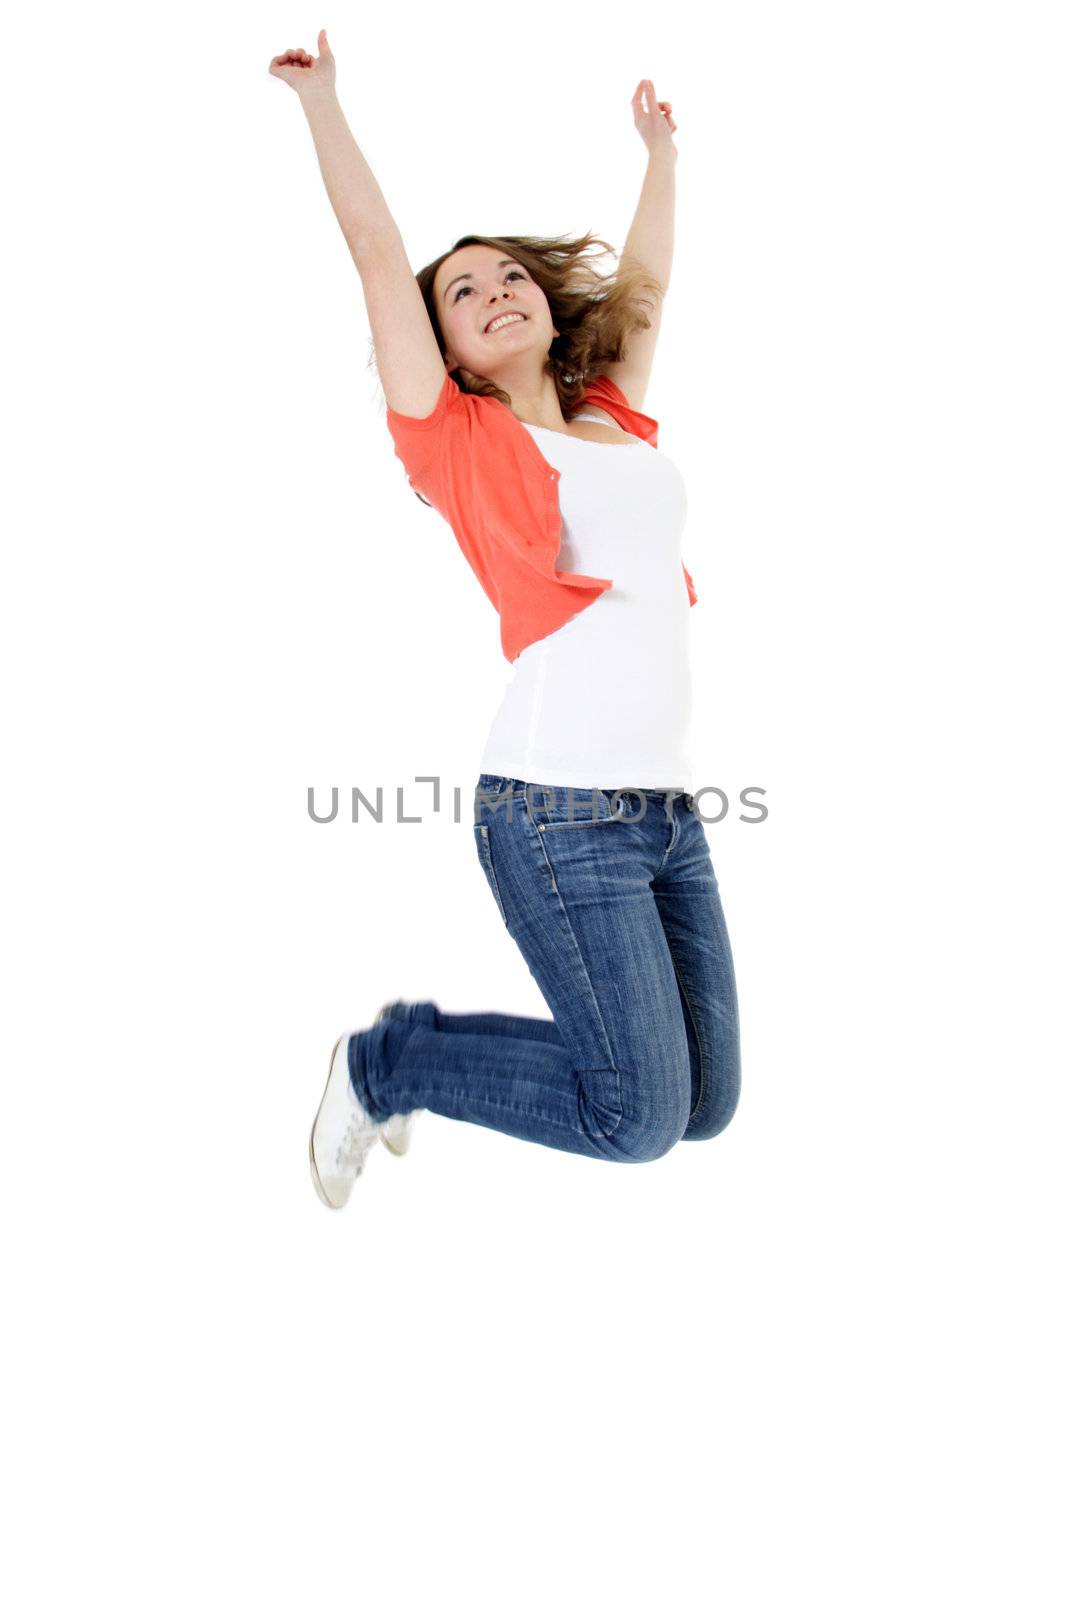 Young woman jumping in the air. All on white background.